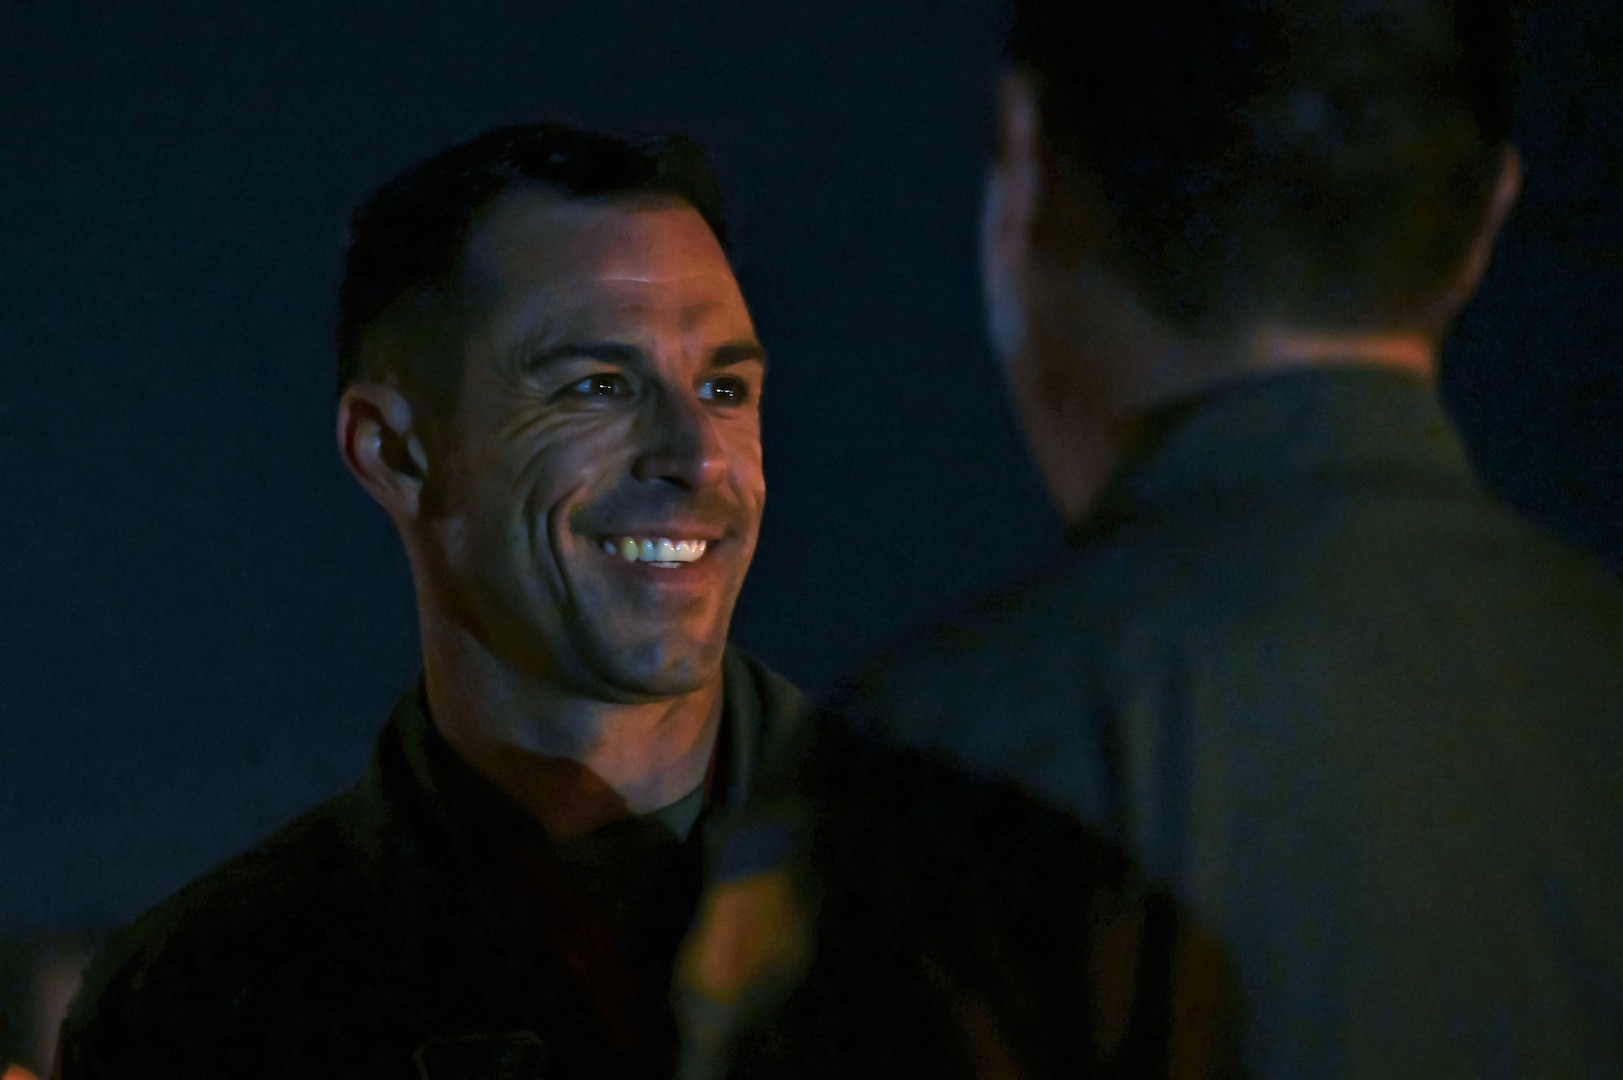 U.S. Air Force Lt. Col. Ross Hobbs, 34th Expeditionary Bomb Squadron commander, smiles after arriving for a Bomber Task Force deployment at Andersen Air Force Base, Guam, Feb. 1, 2023.